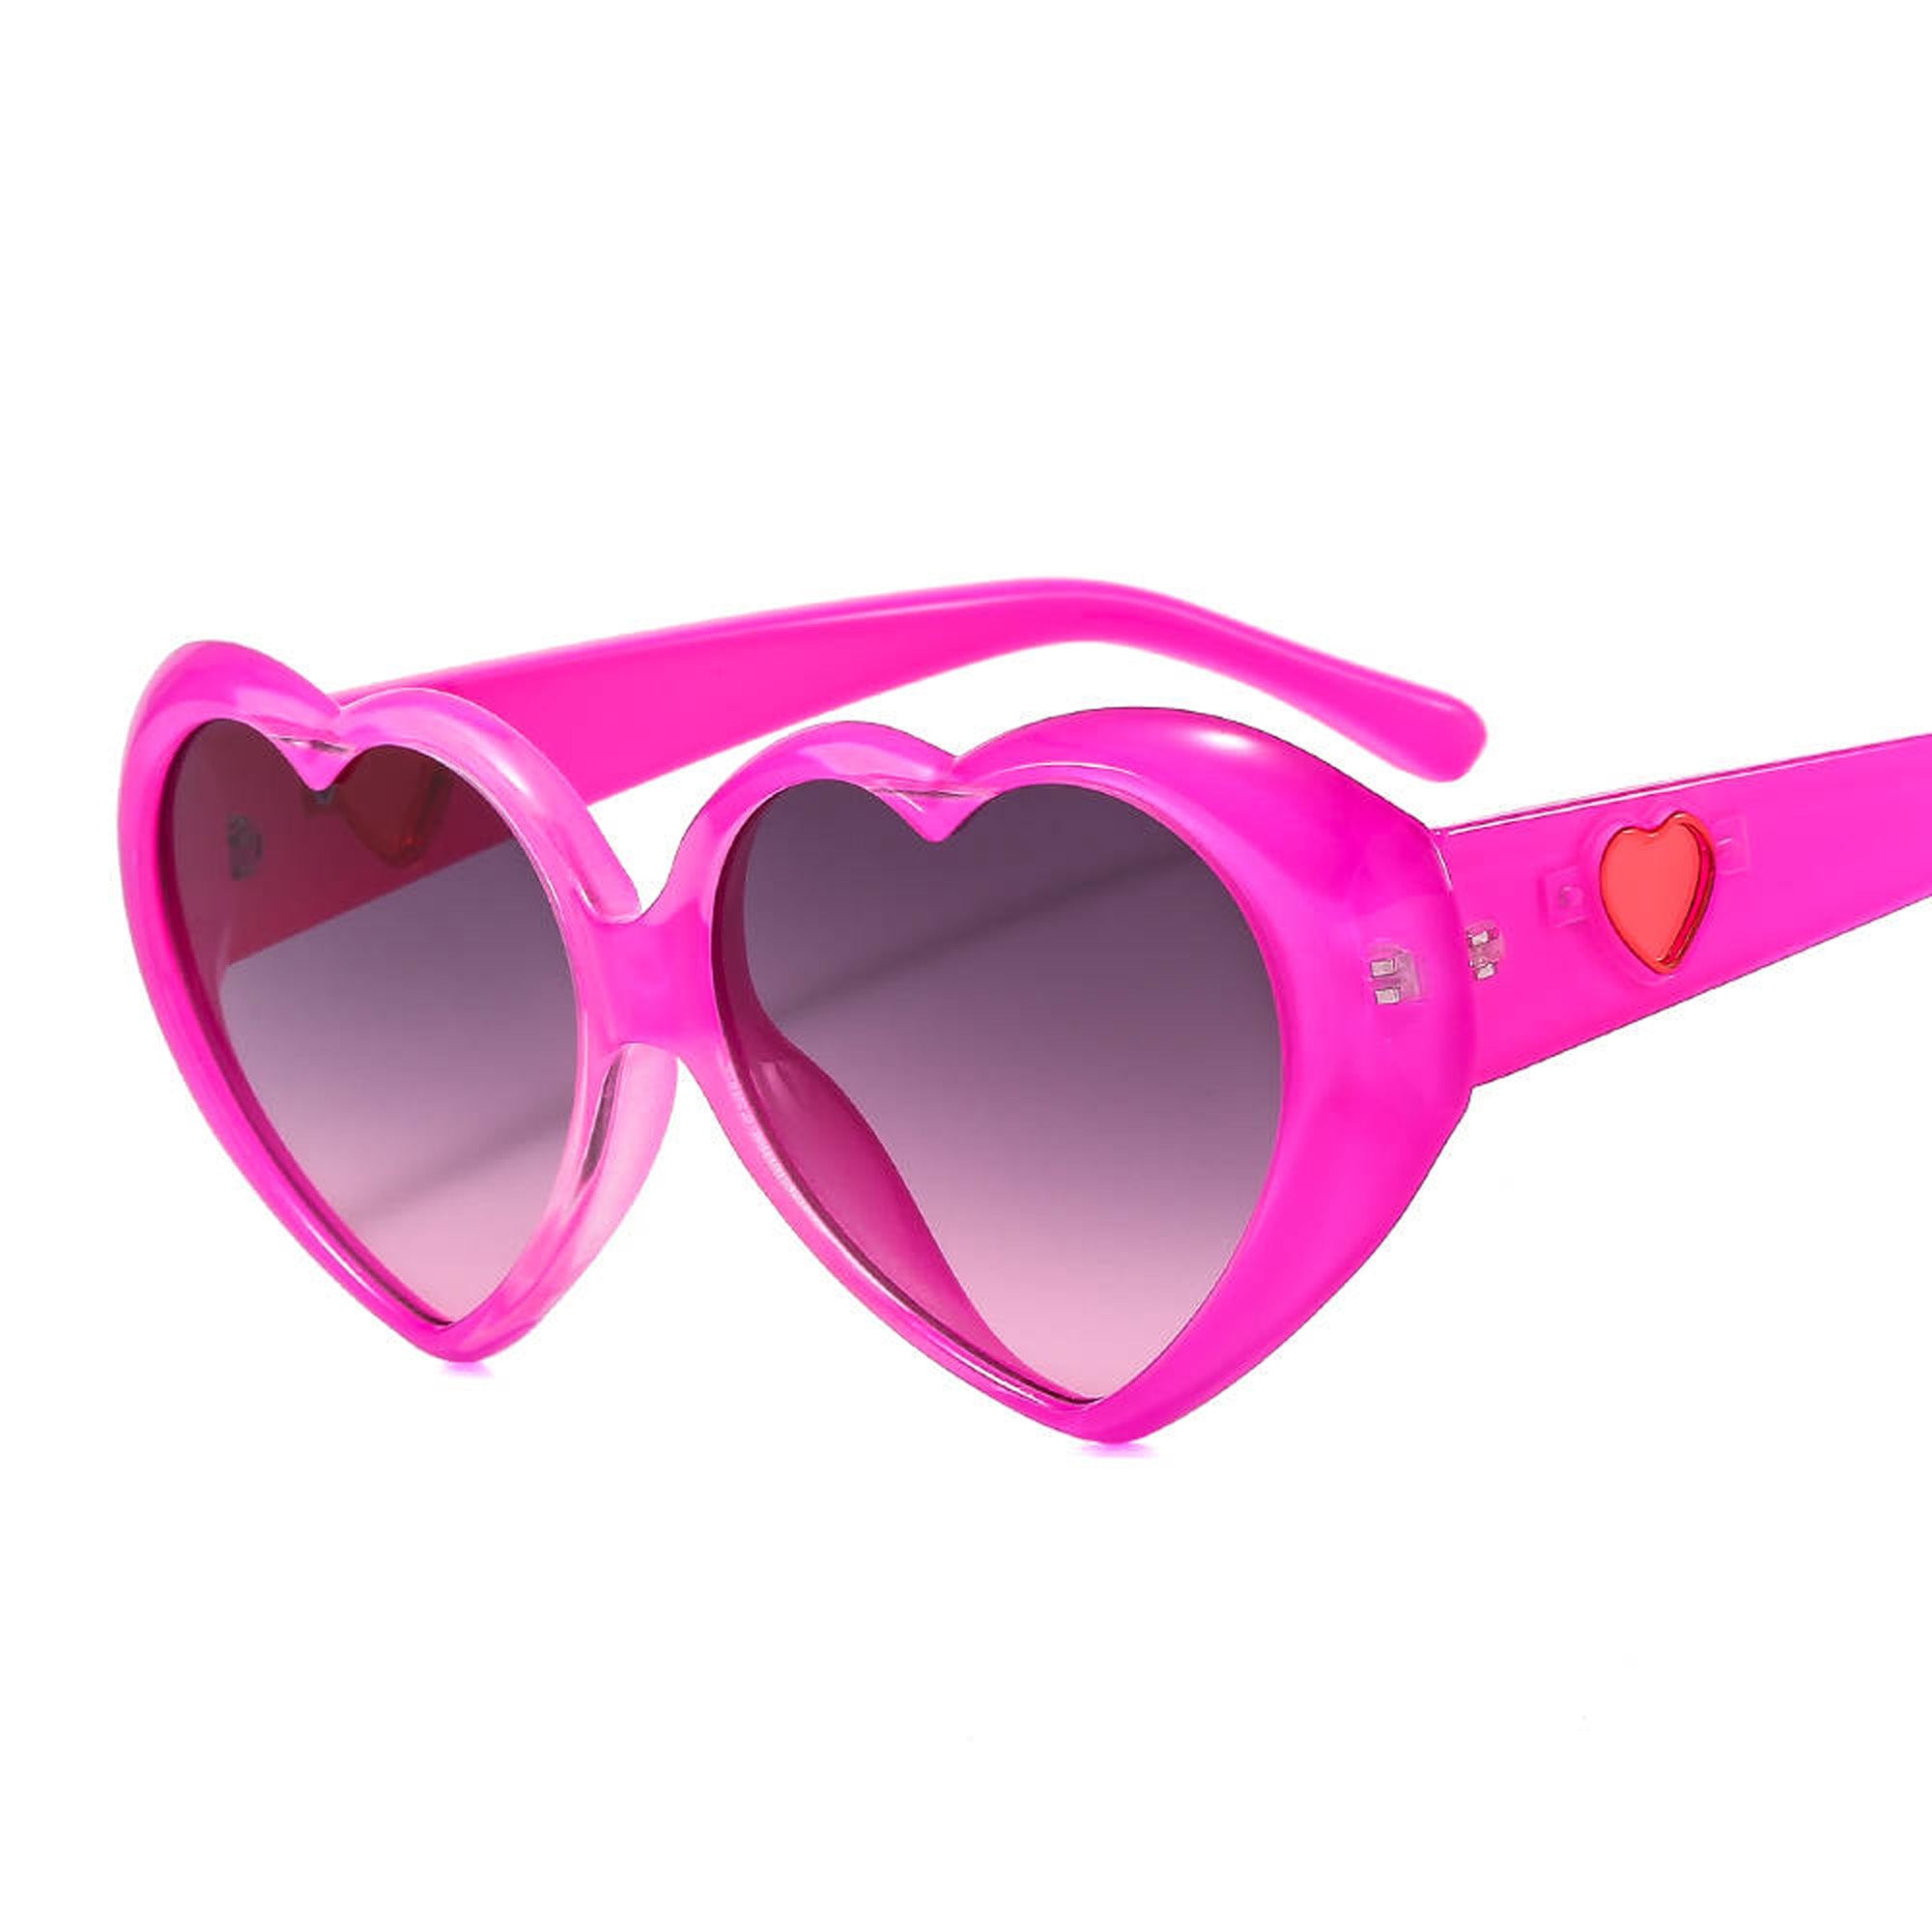 Pink Heart Shaped Sunglasses for Adults